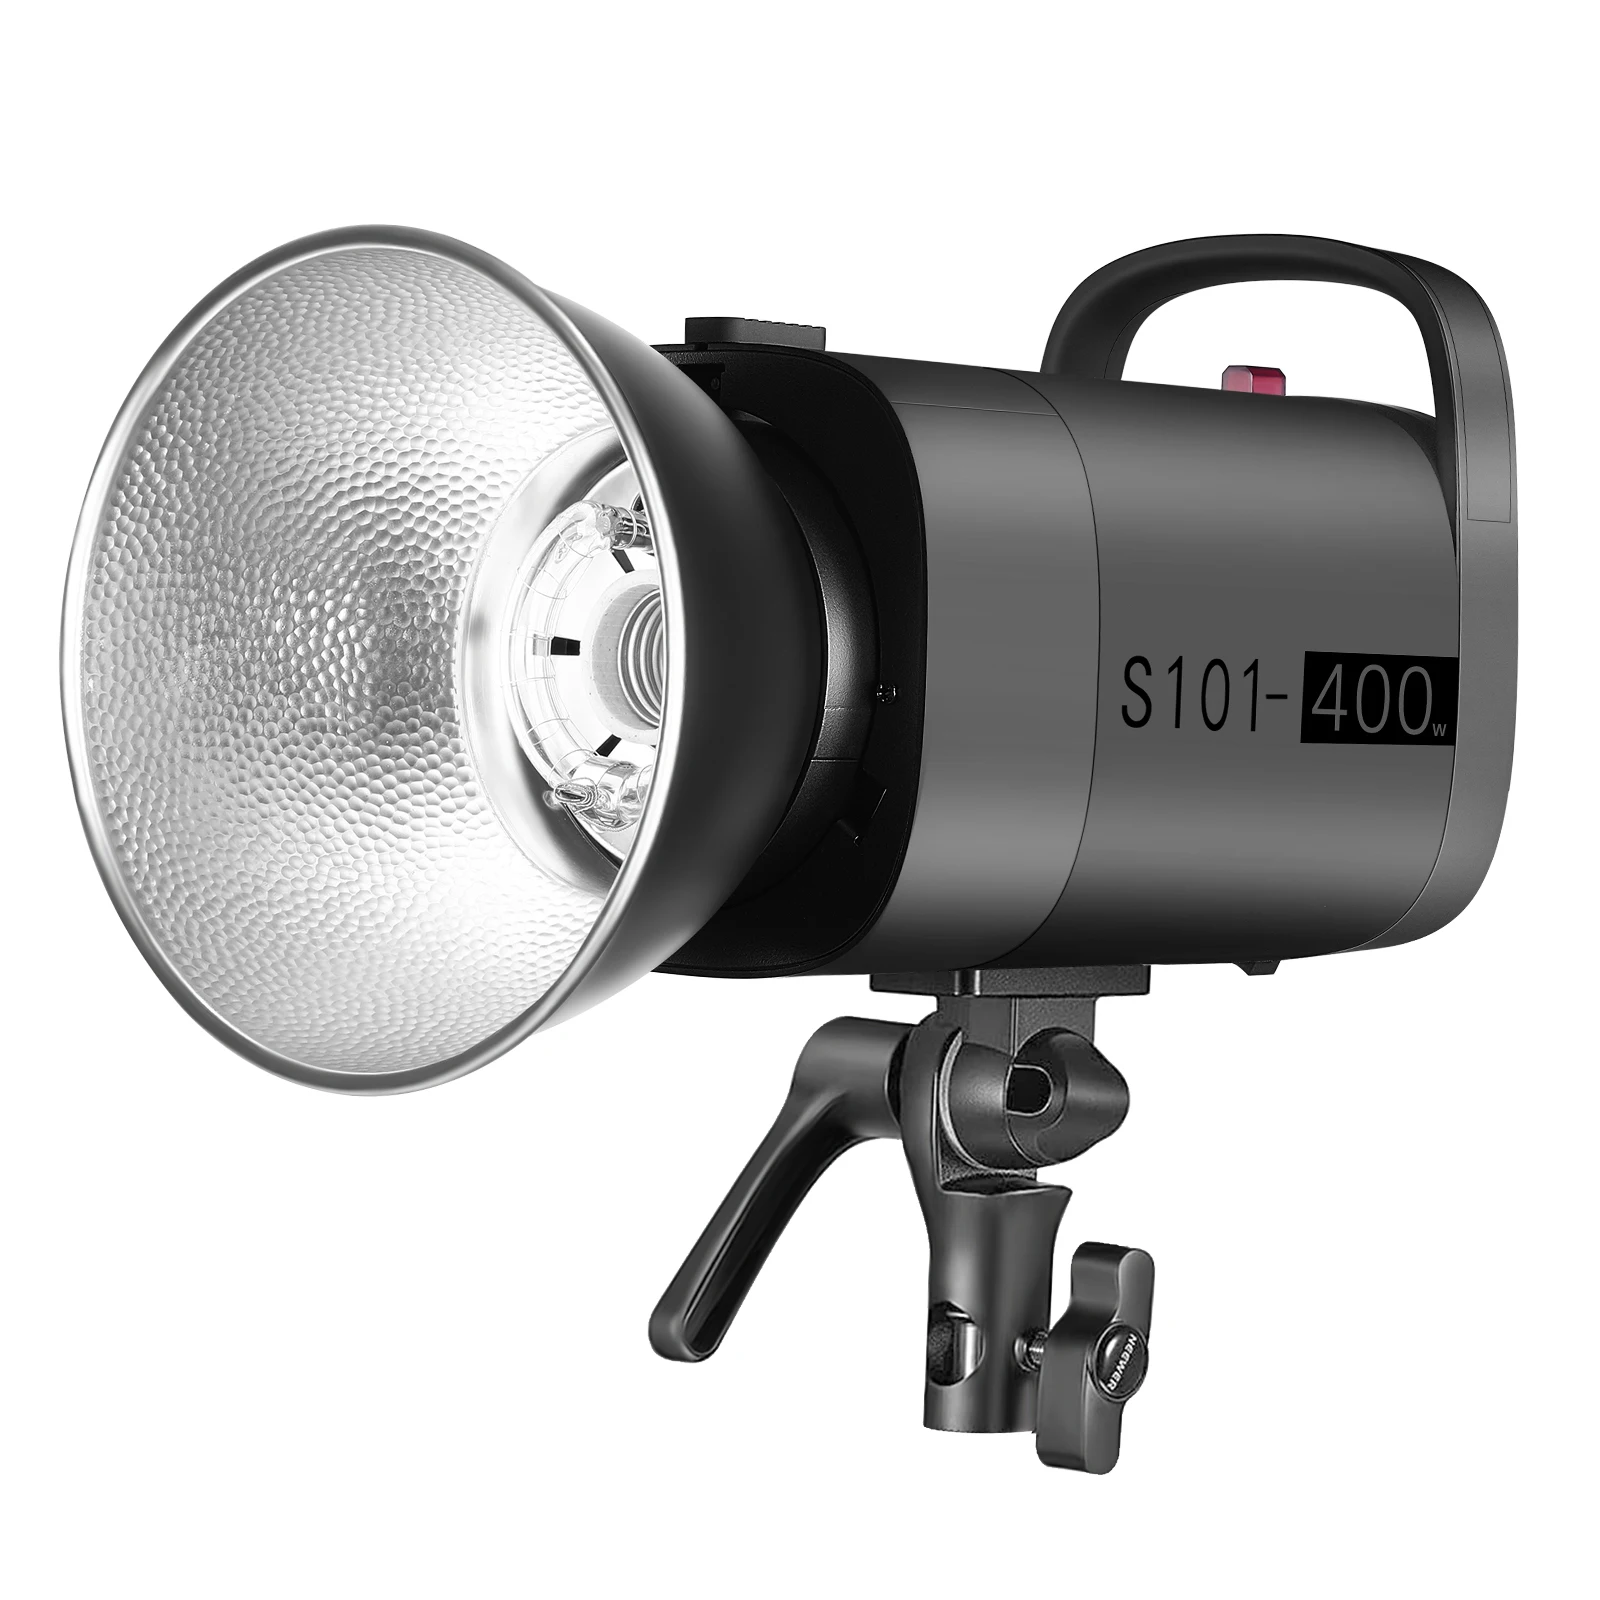 

Neewer Studio Monolight Strobe Flash Light, 5600K With Modeling Lamp, Bowens Mount For Shooting, Product / Portrait Photography